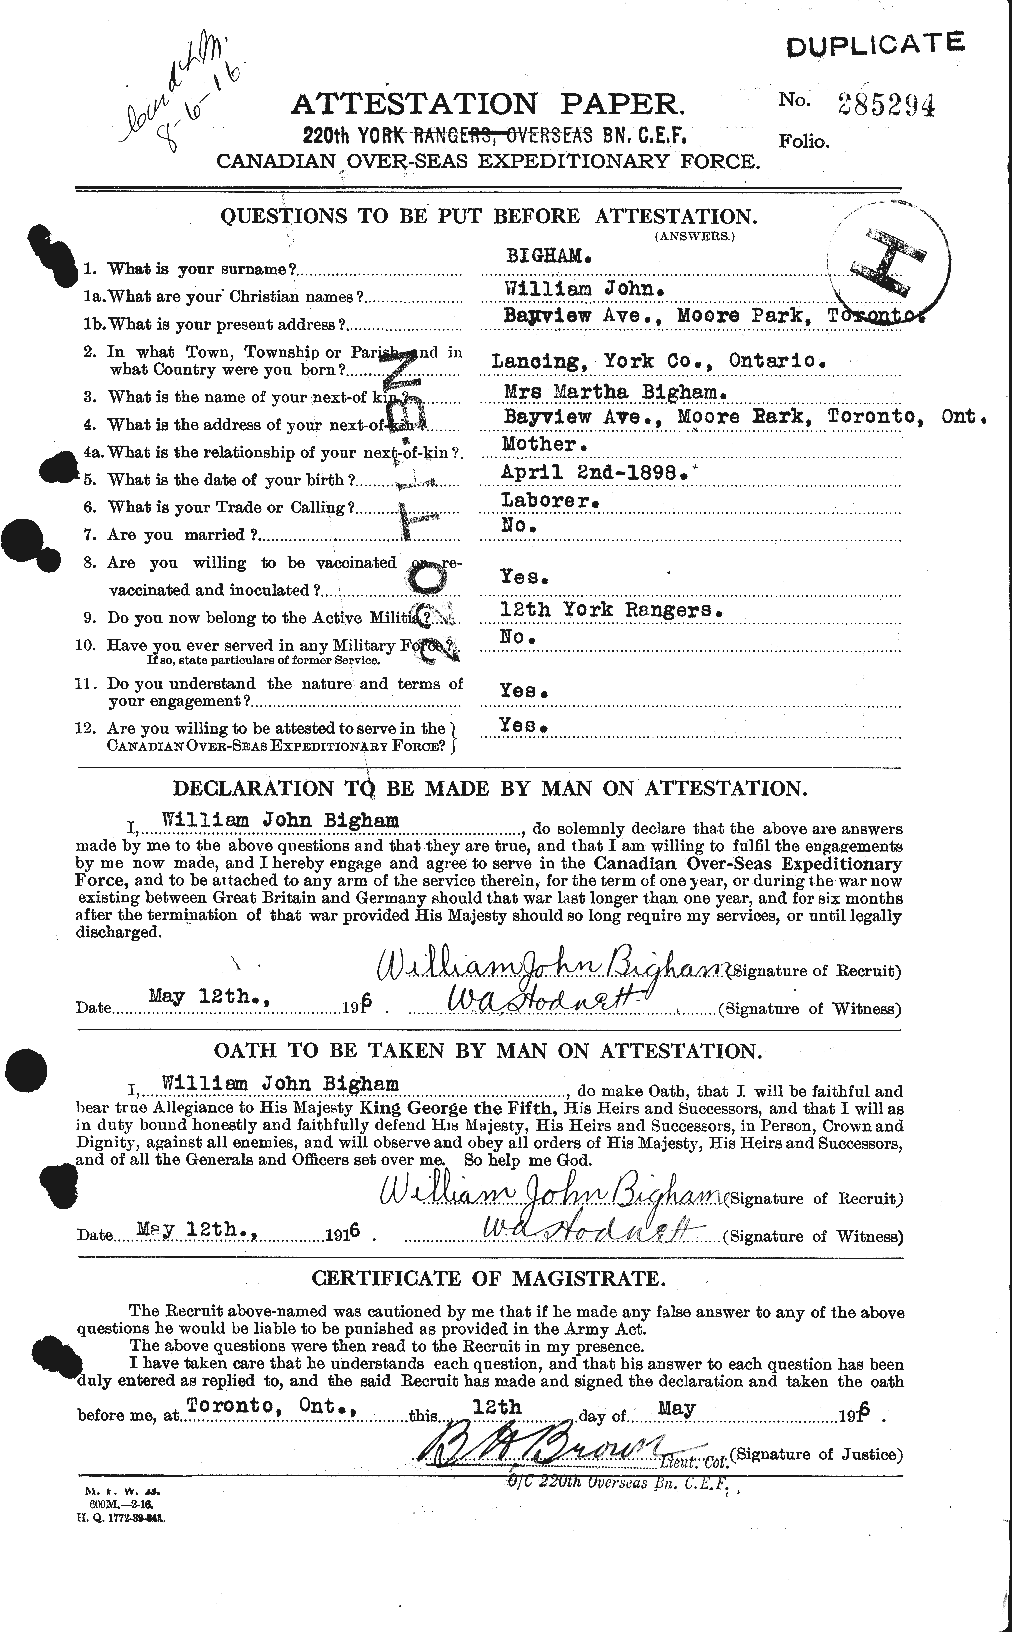 Personnel Records of the First World War - CEF 239132a